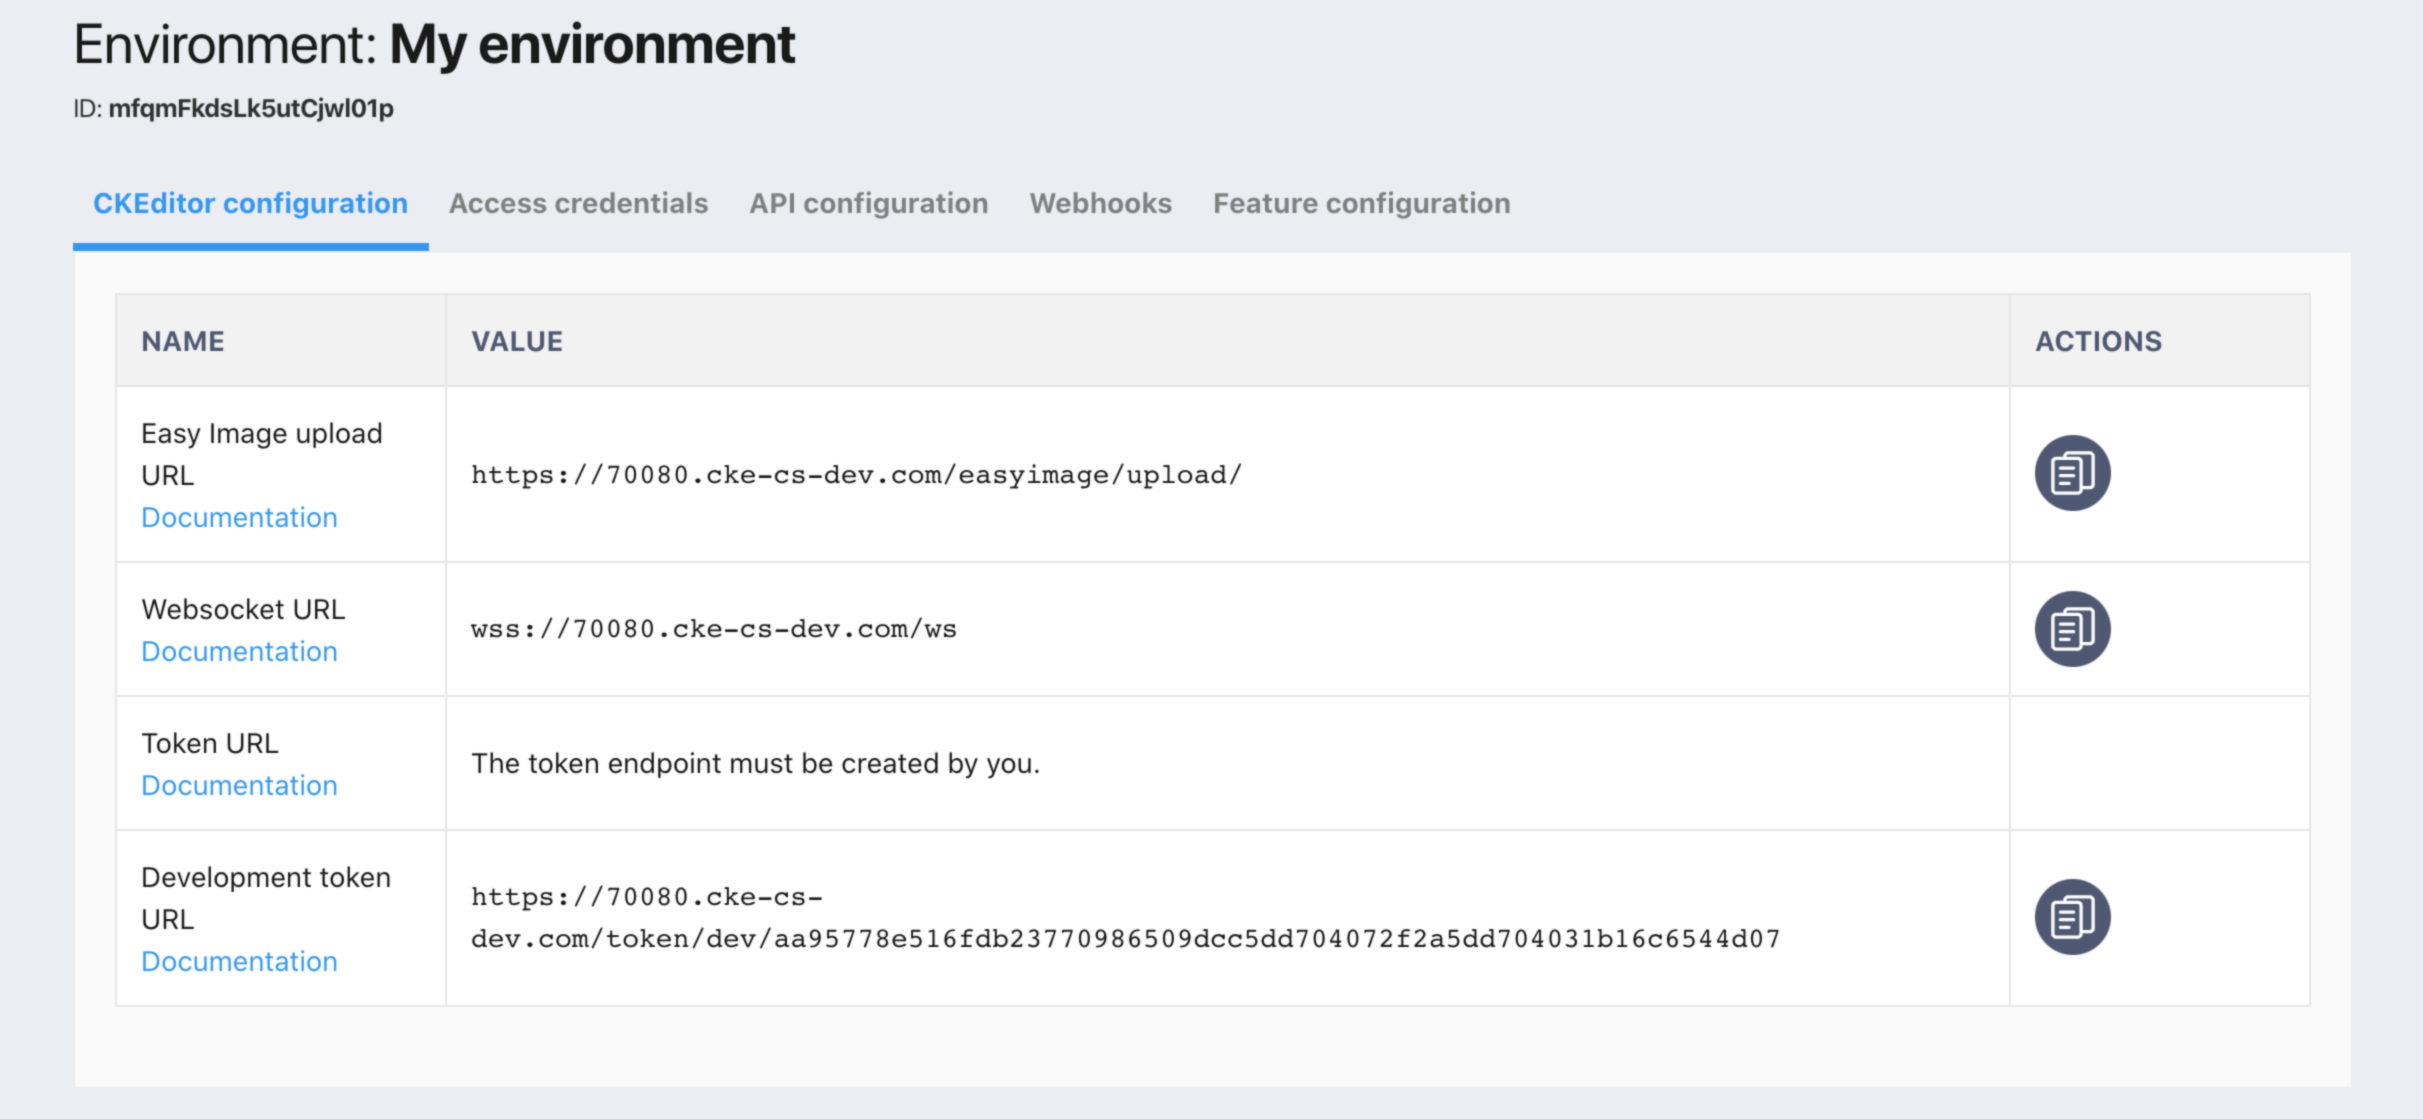 CKEditor 5 Configuration with the development token URL.